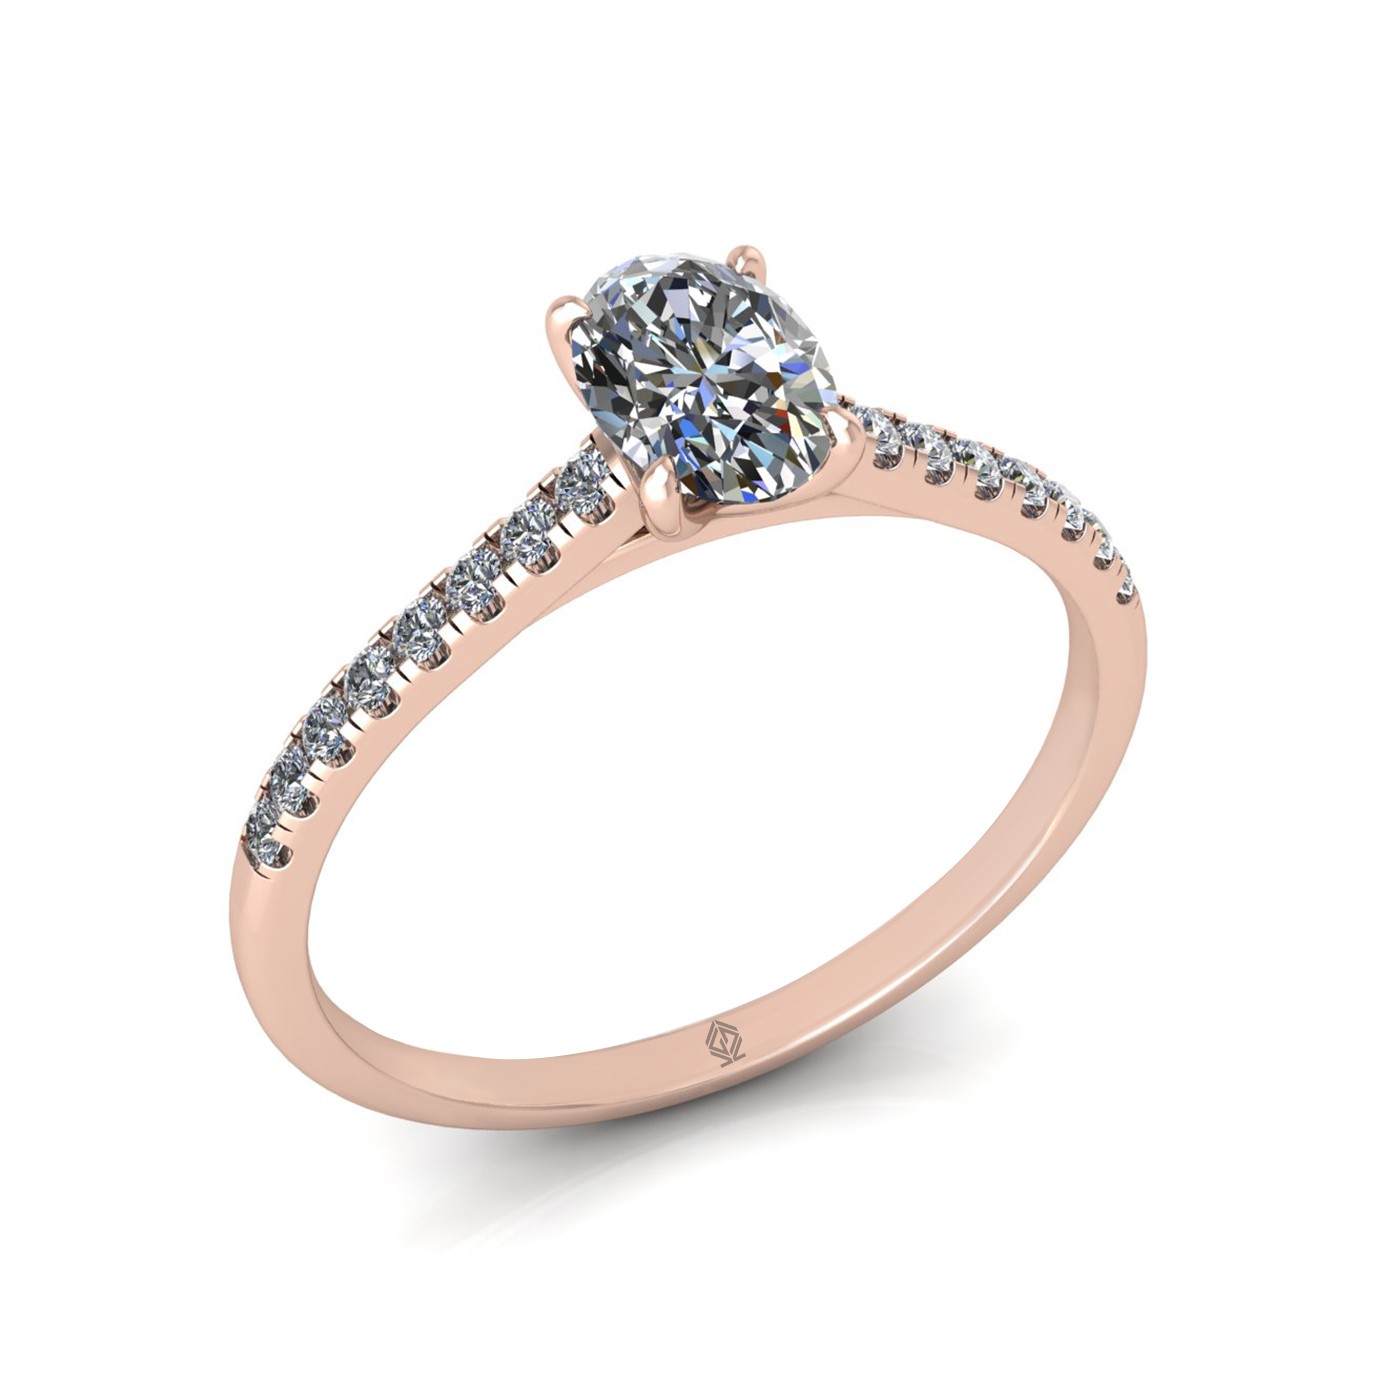 18k rose gold  0,50 ct 4 prongs oval cut diamond engagement ring with whisper thin pavÉ set band Photos & images